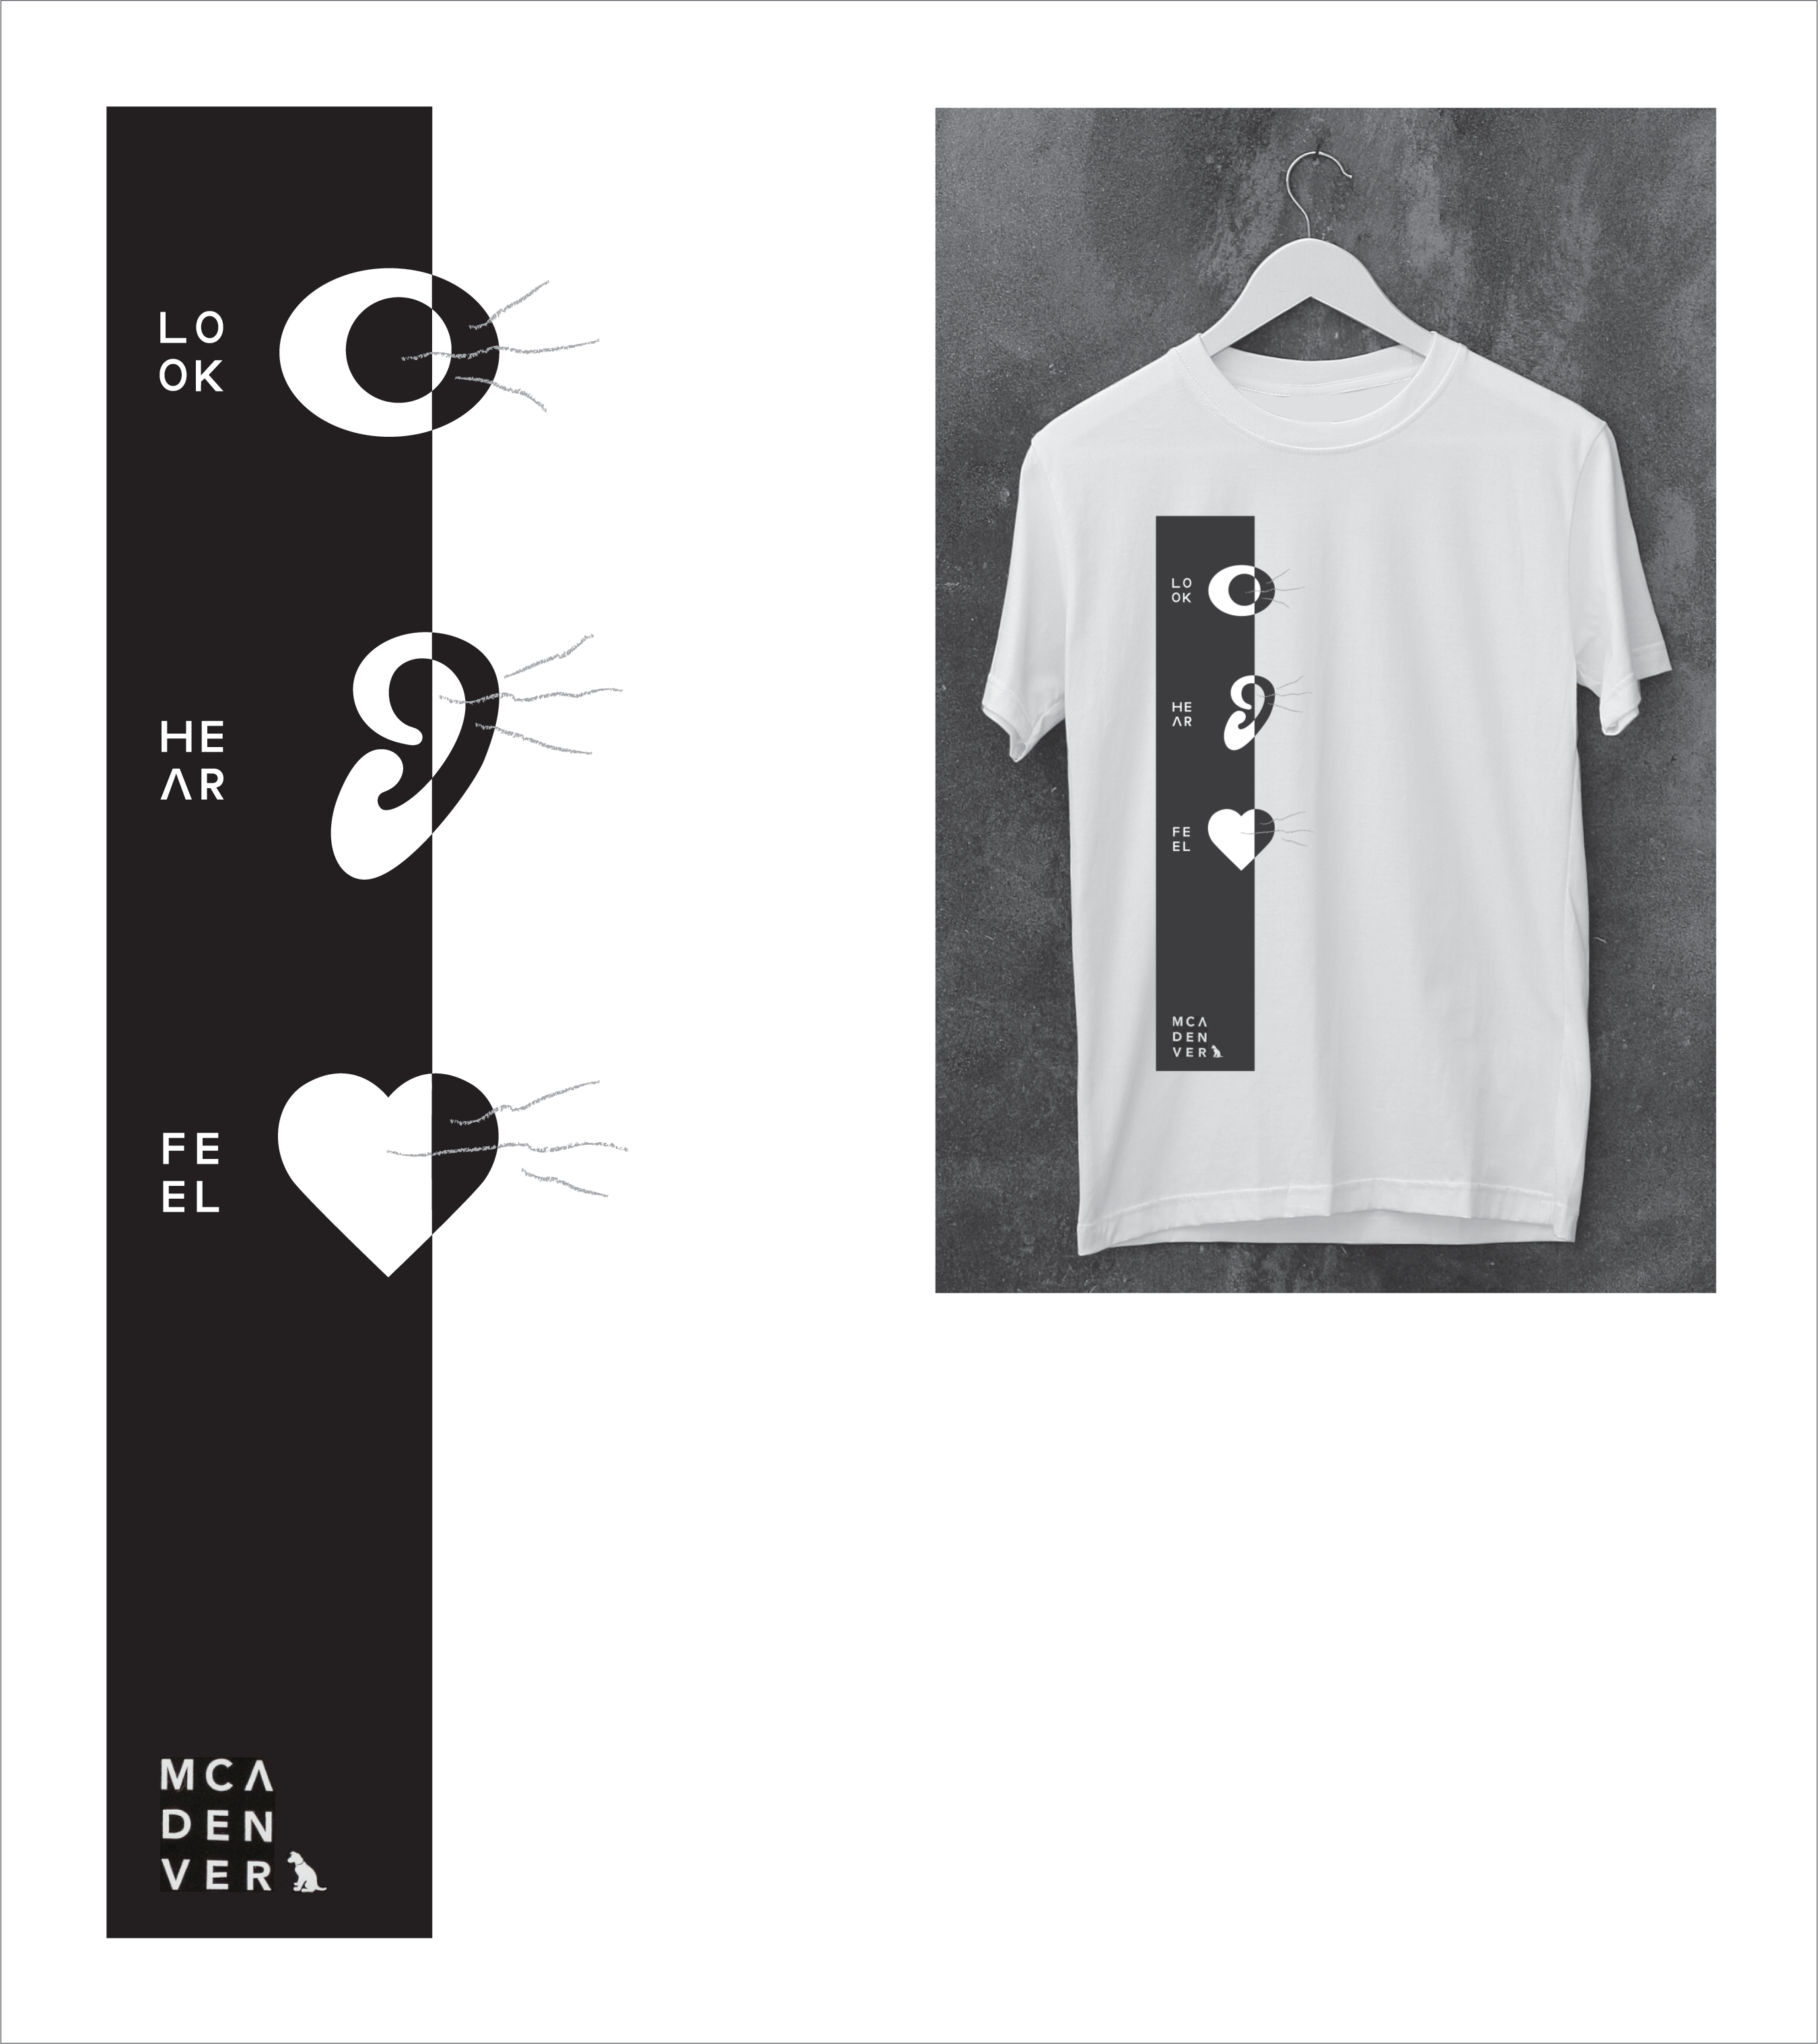 An image of a white t-shirt with a black and white design on it. The text on the image corresponds with each graphic on the image. The words “look” are next to an abstract eye, the words “hear” are next to an abstract ear, the words “feel” are next to a heart. 